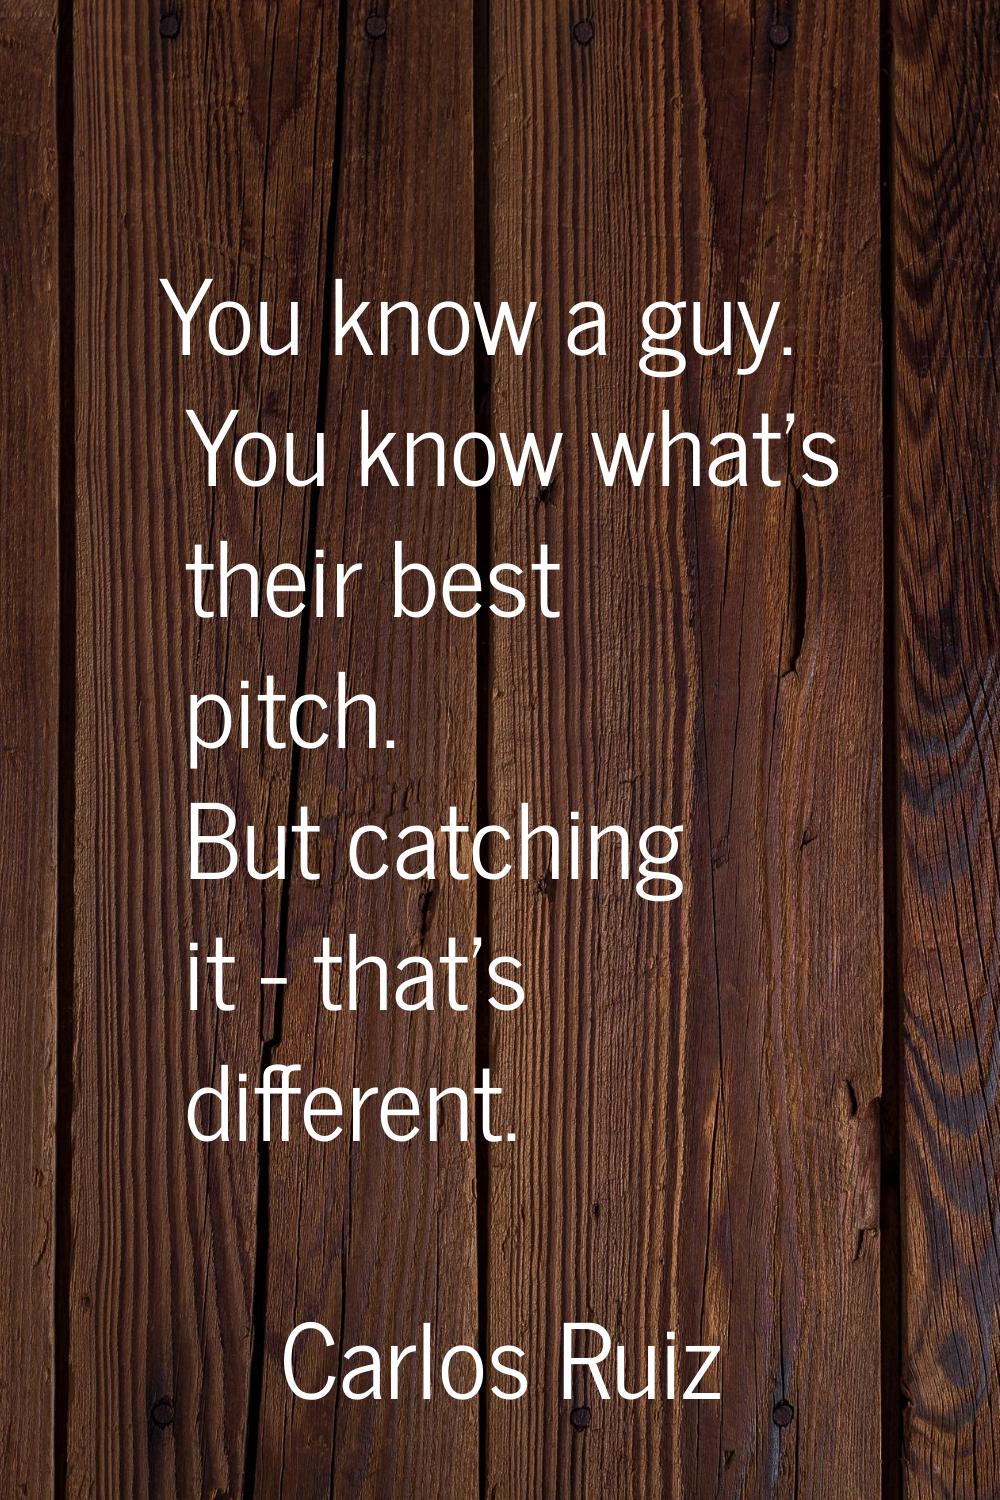 You know a guy. You know what's their best pitch. But catching it - that's different.